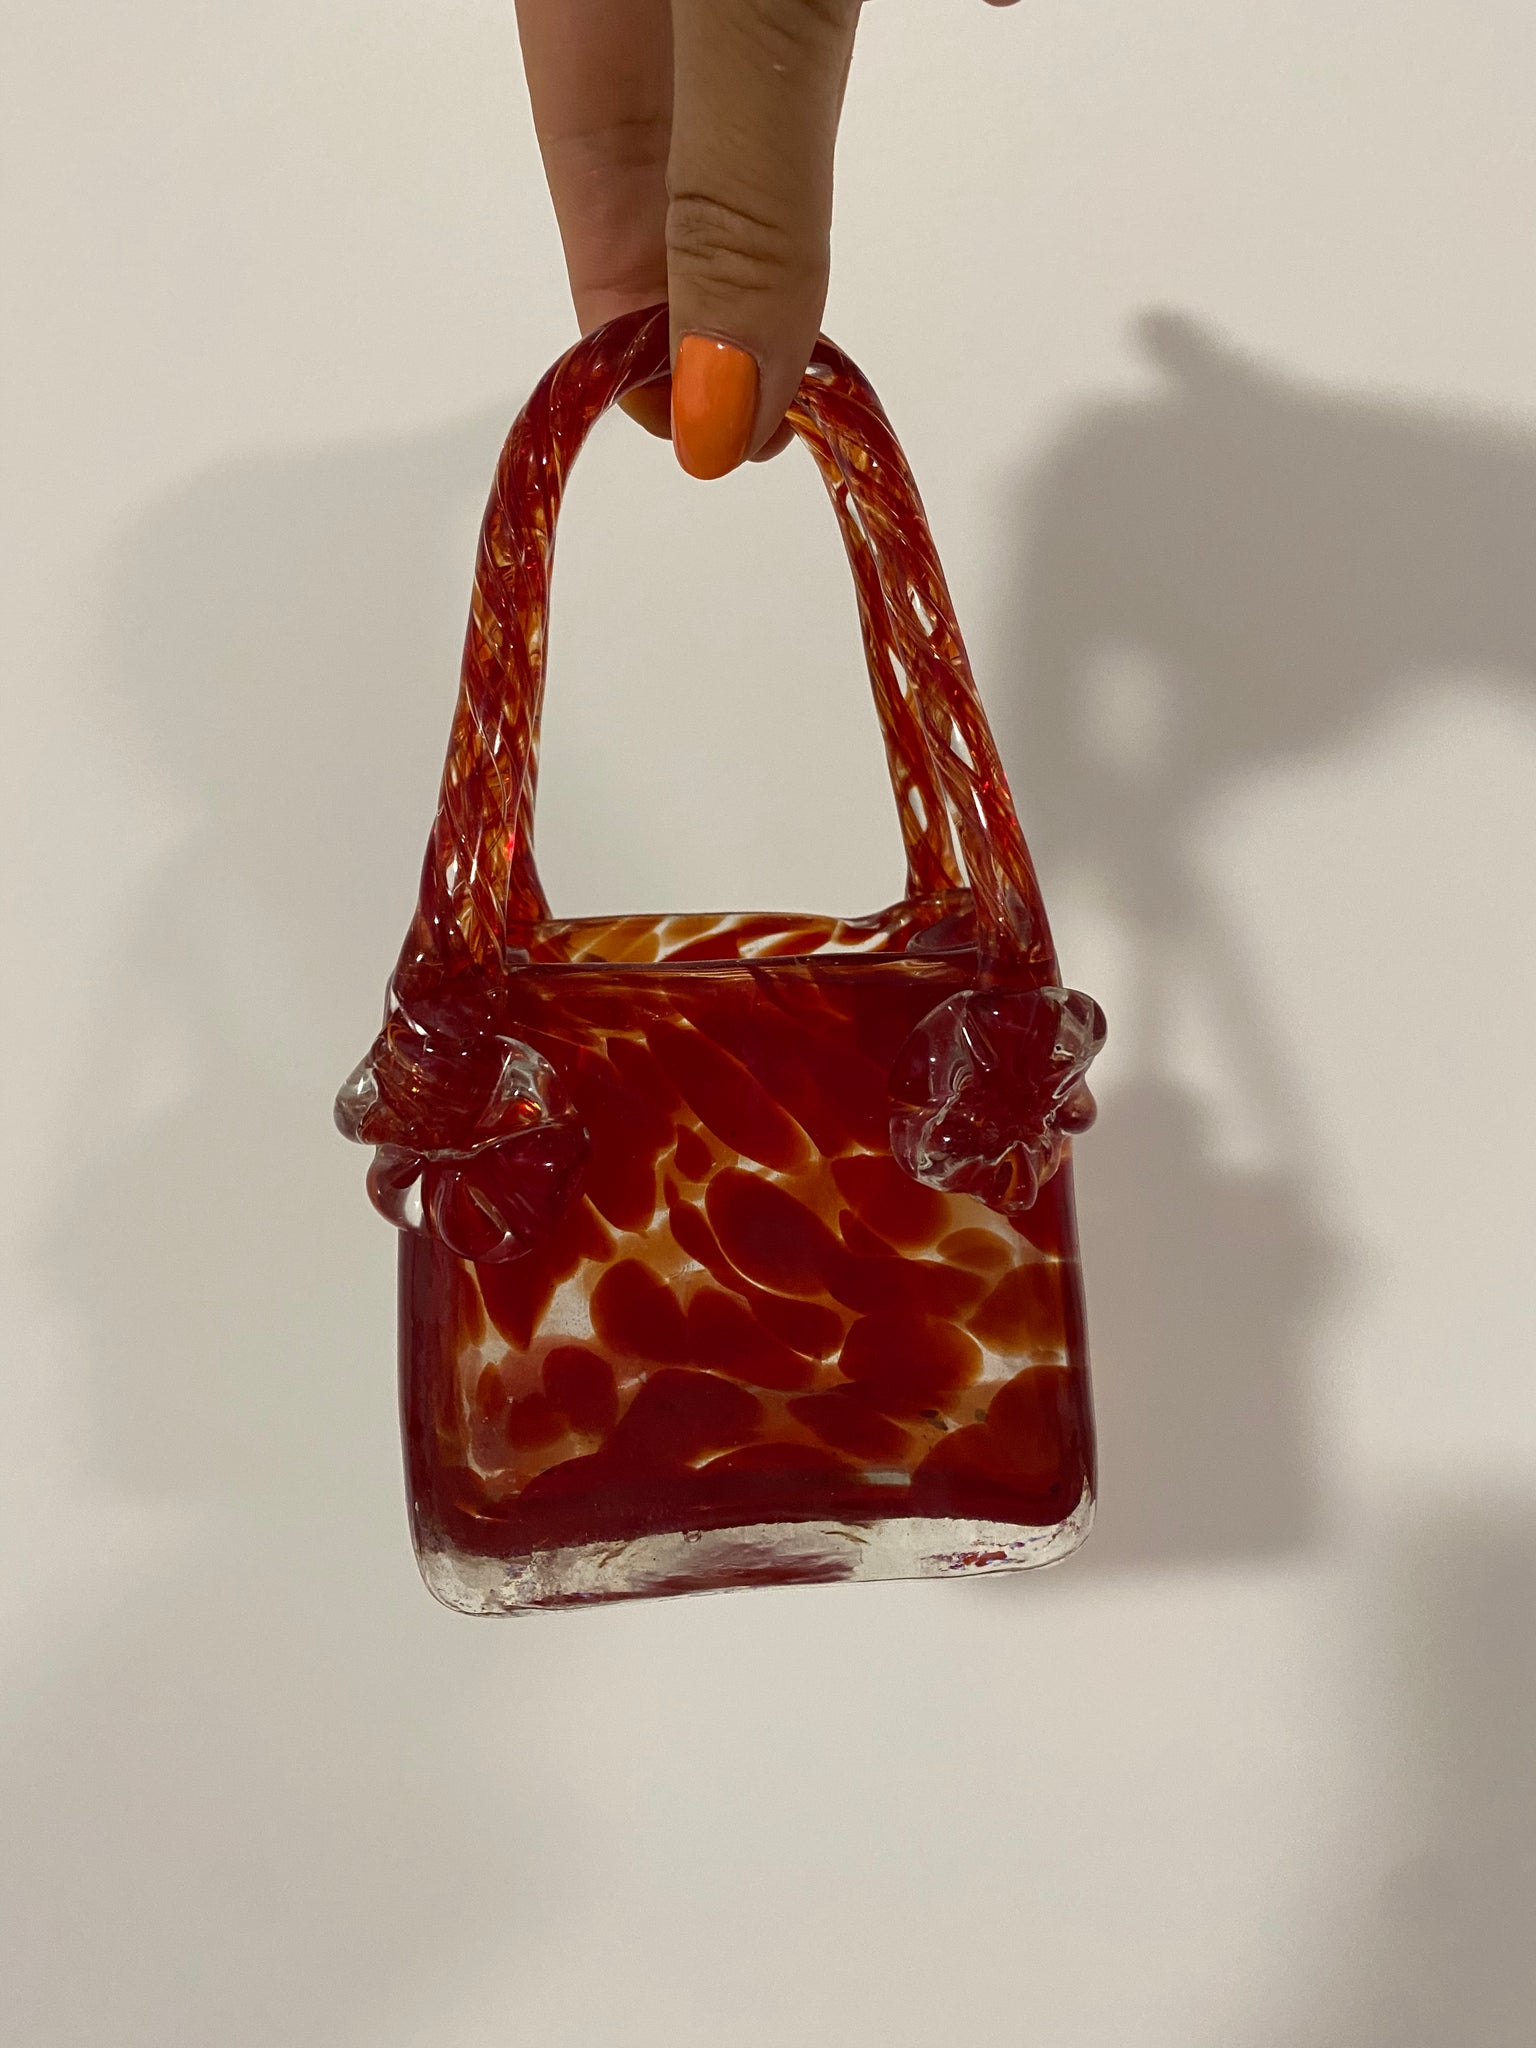 Small red Murano style glass purse vase